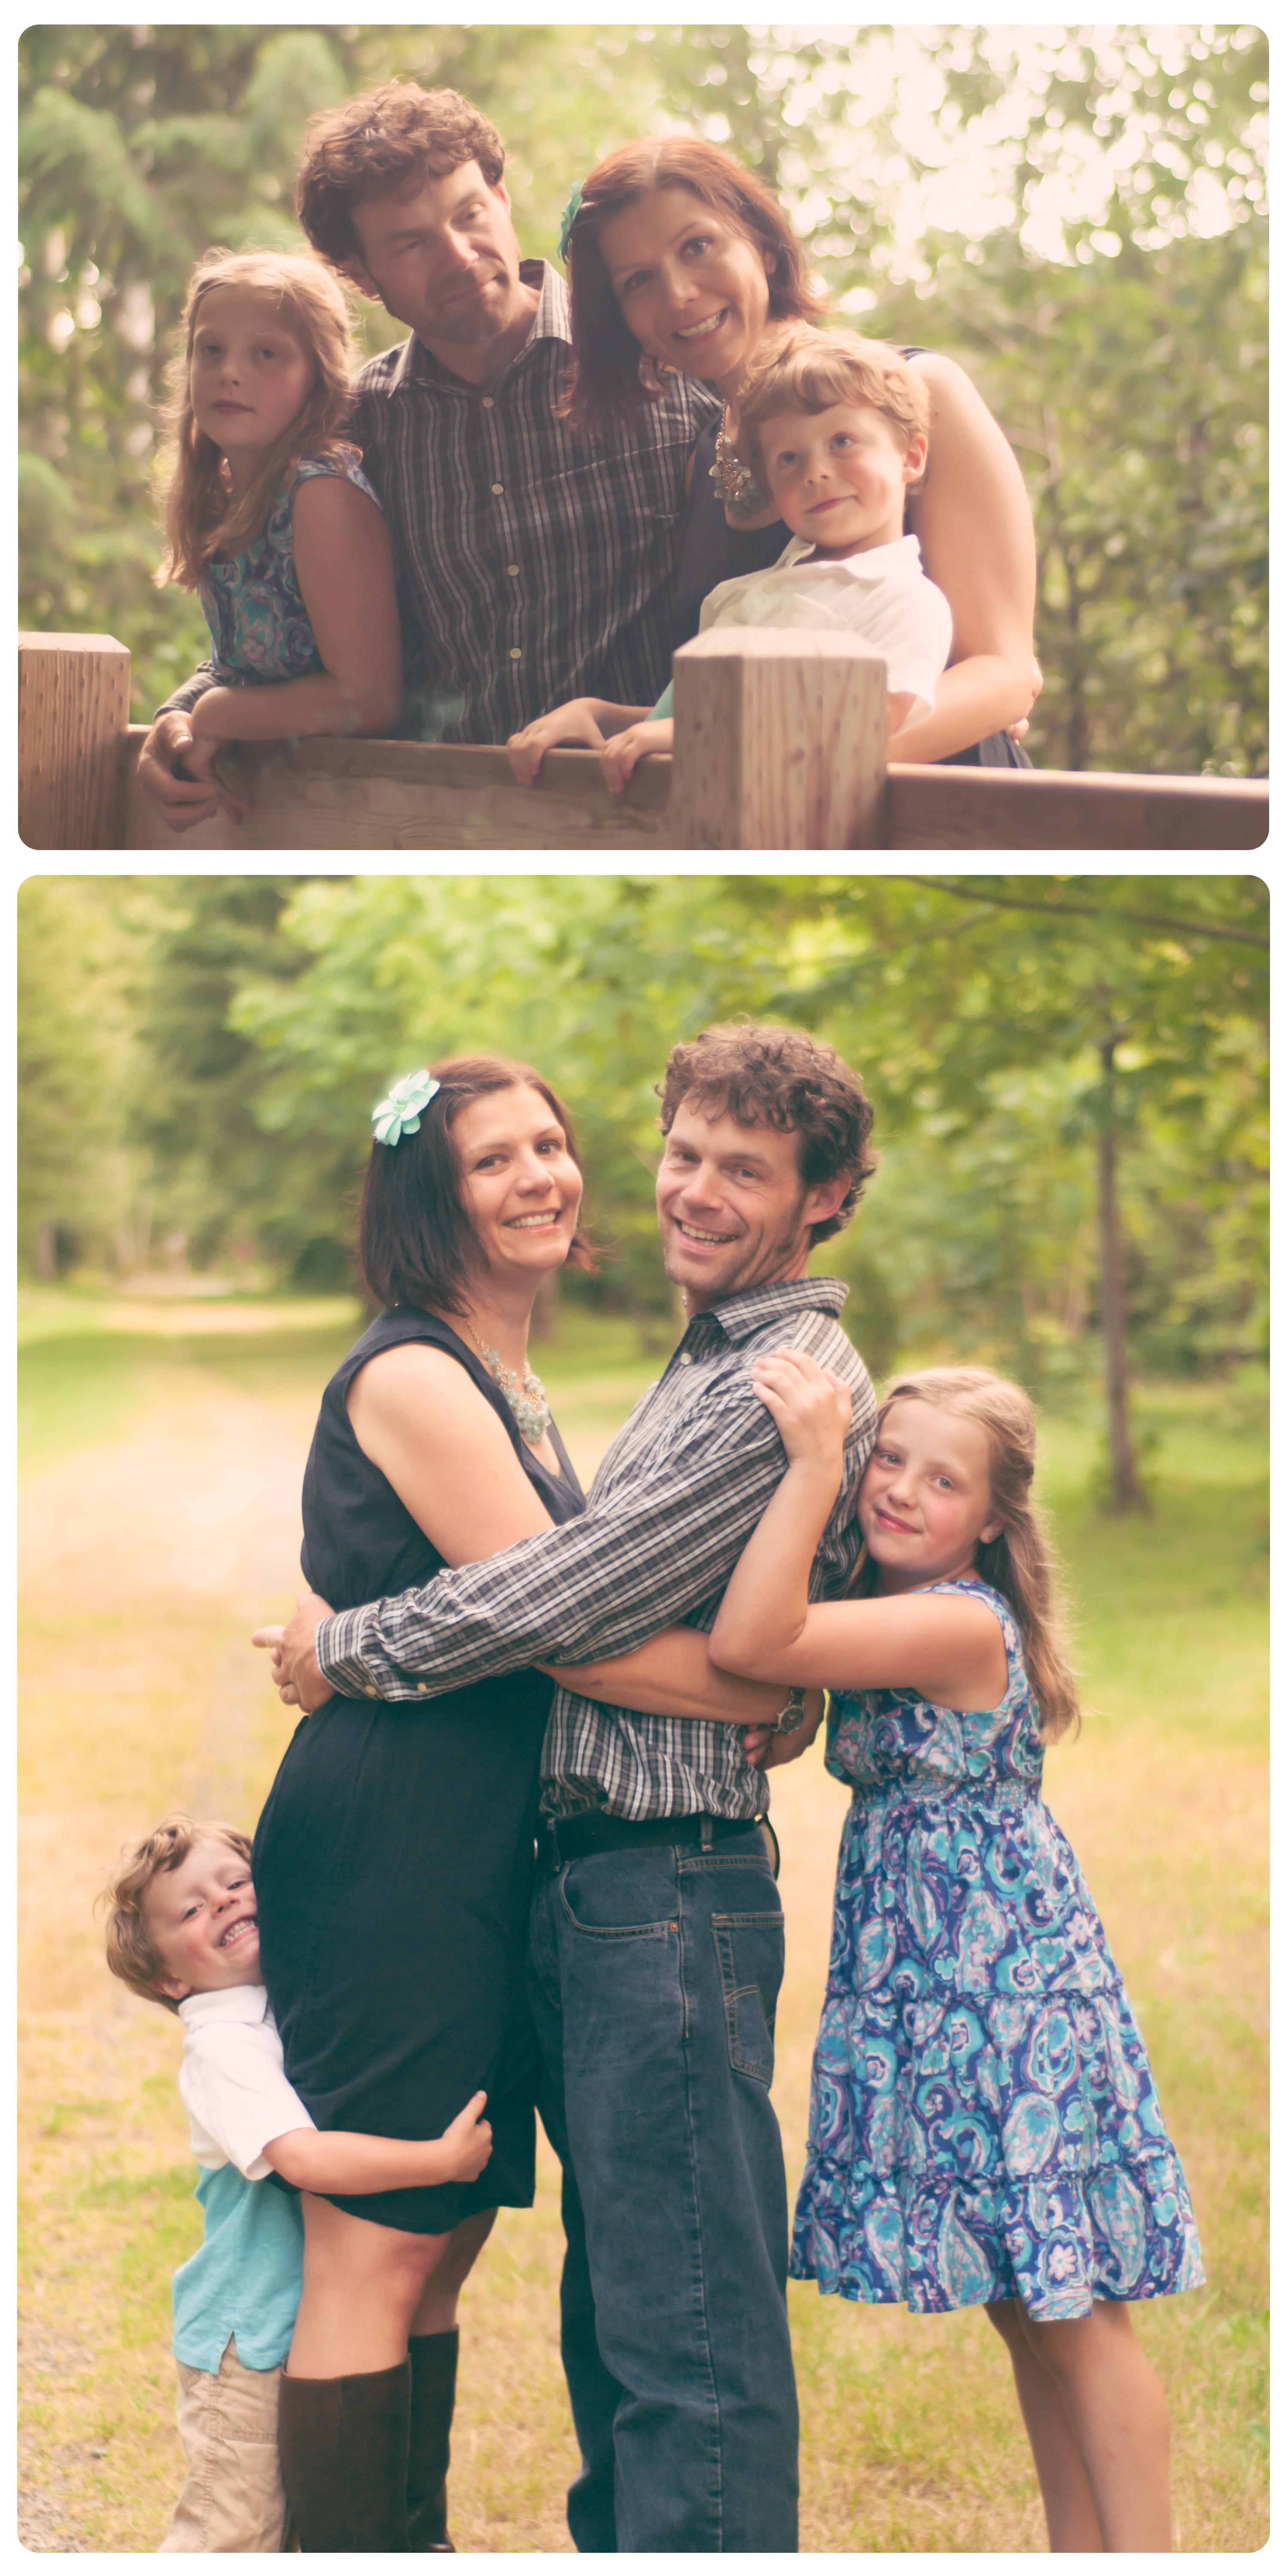 Rasmussen Family Session {North Bend, WA}